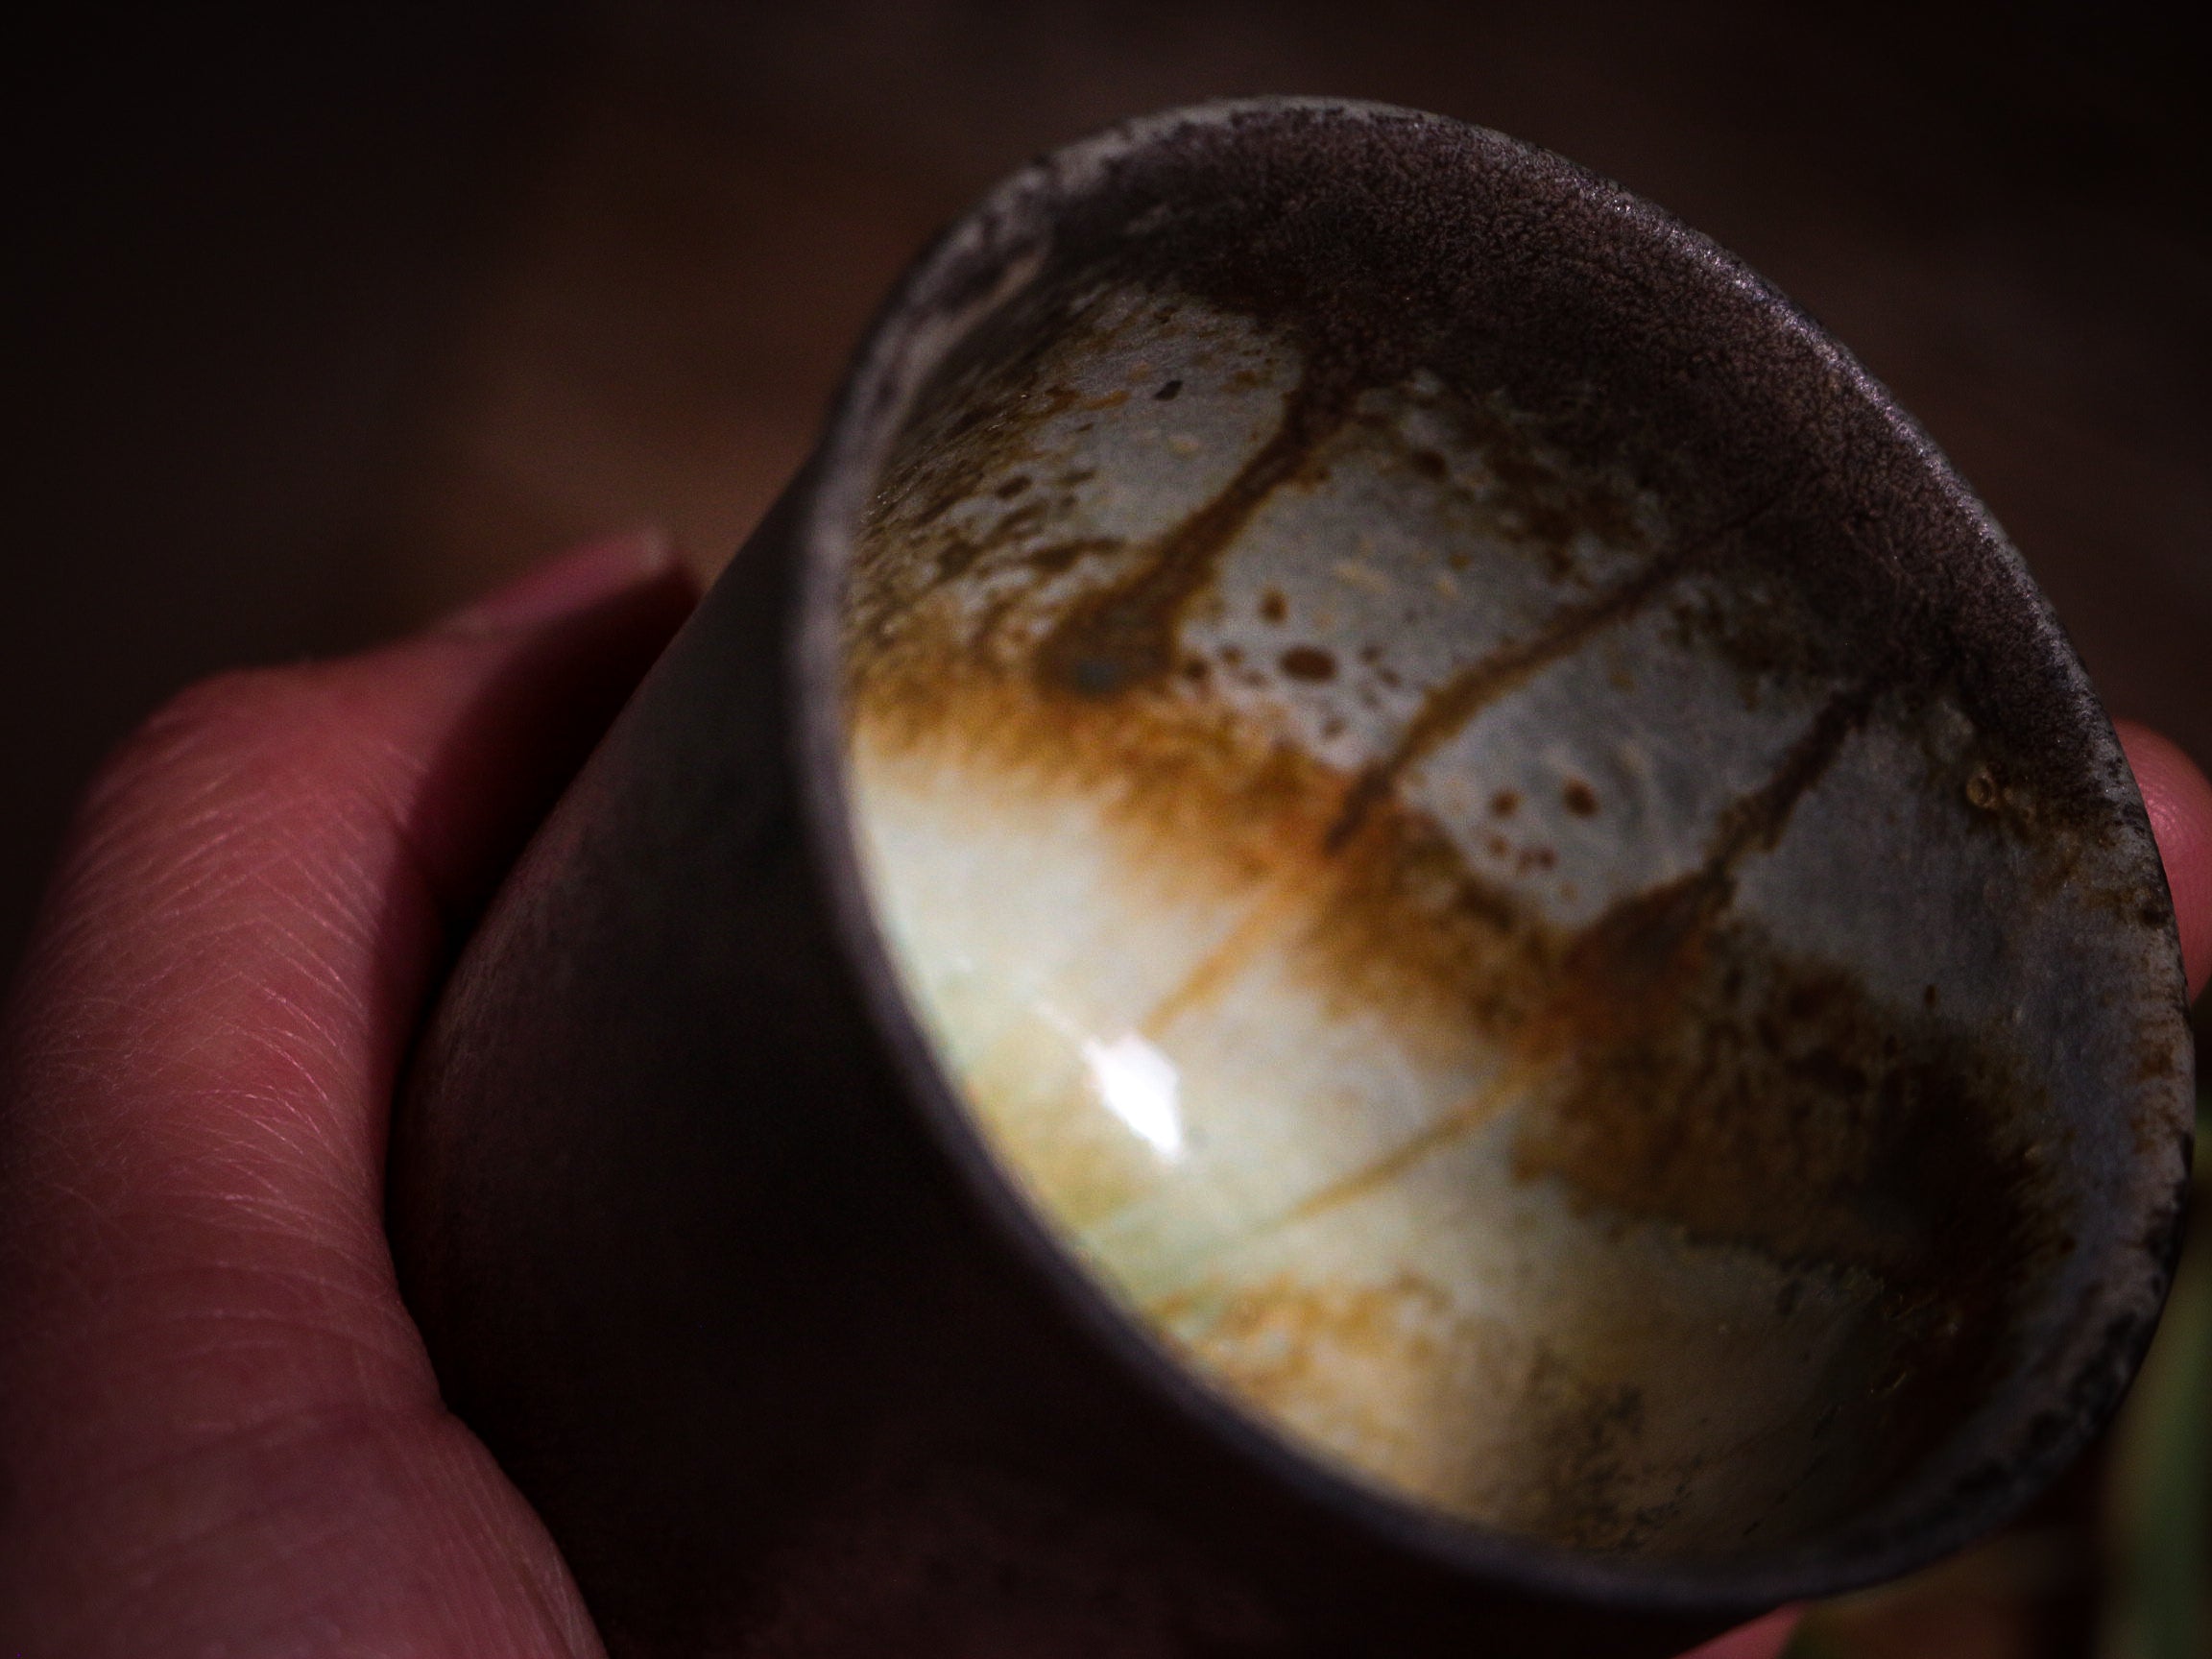 Thunderstorm Woodfired Teacup